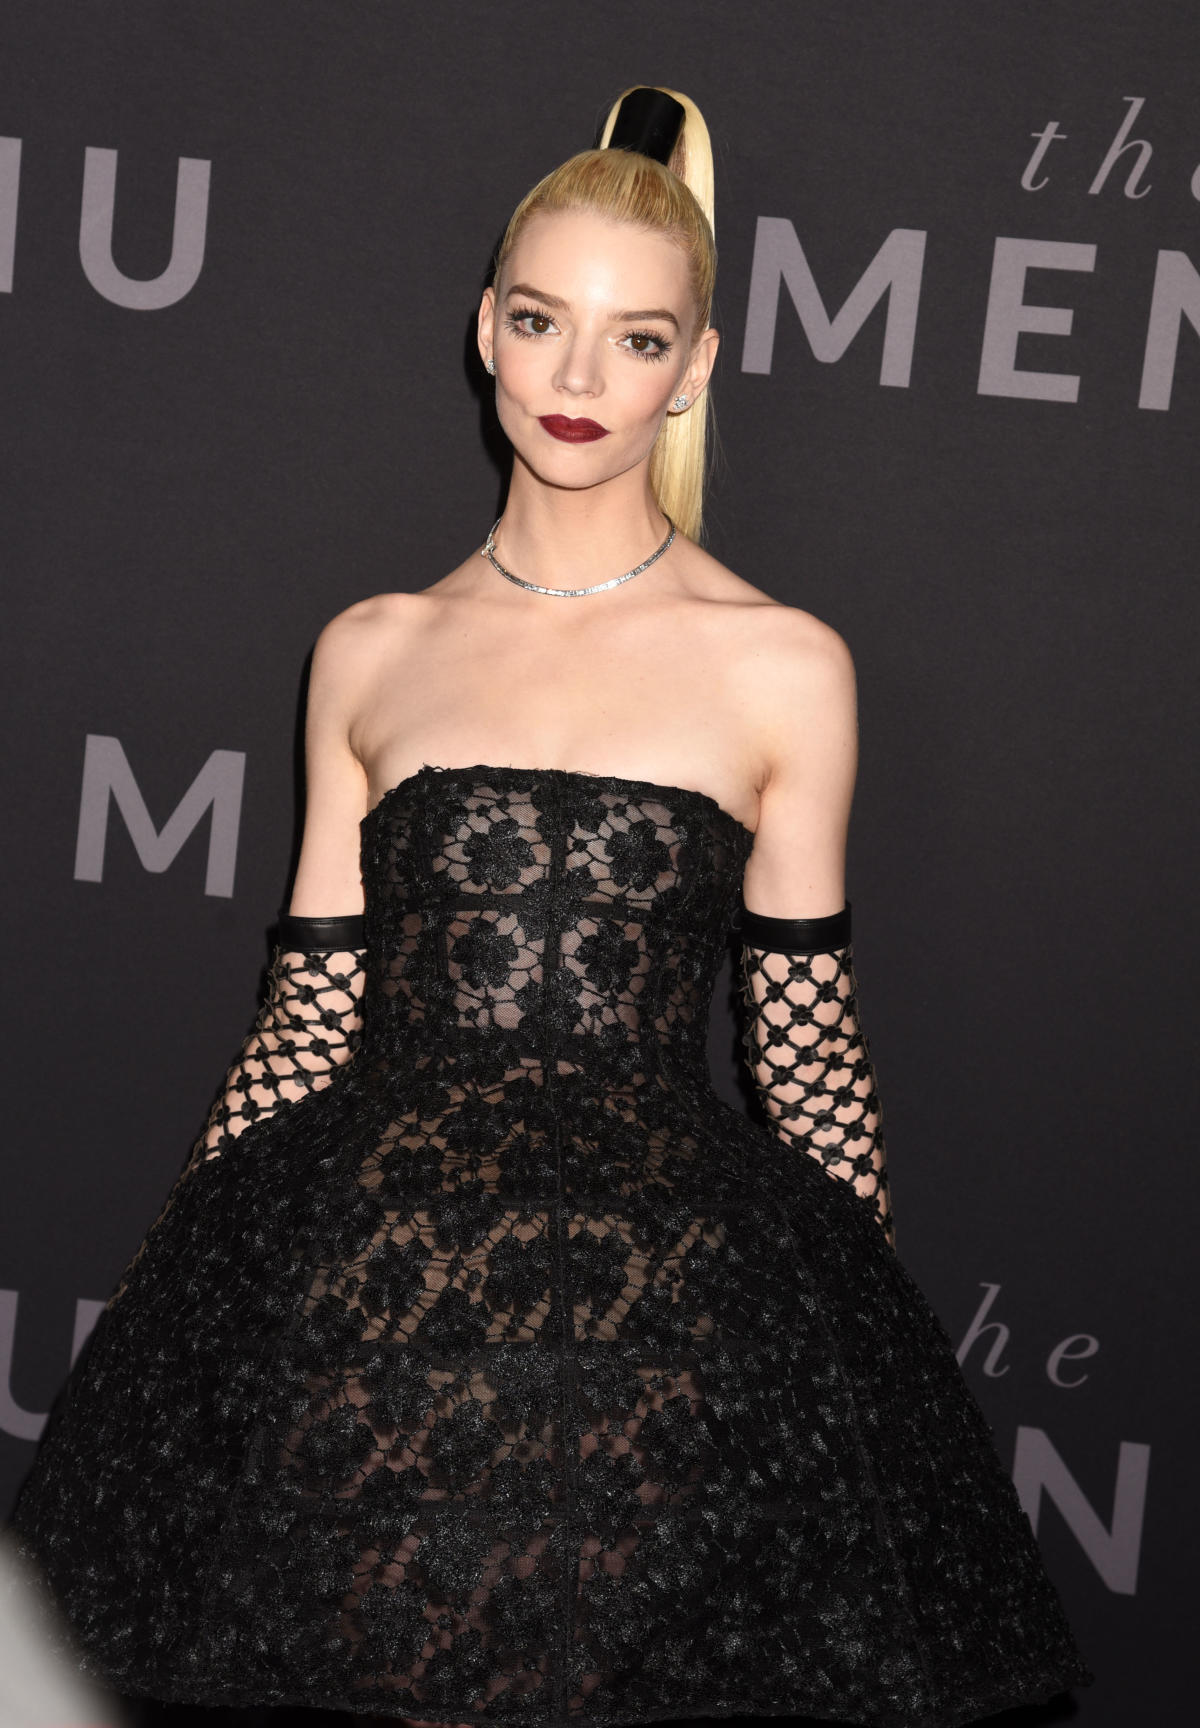 It just can't be done”: Anya Taylor-Joy Refused to Mimic Charlize